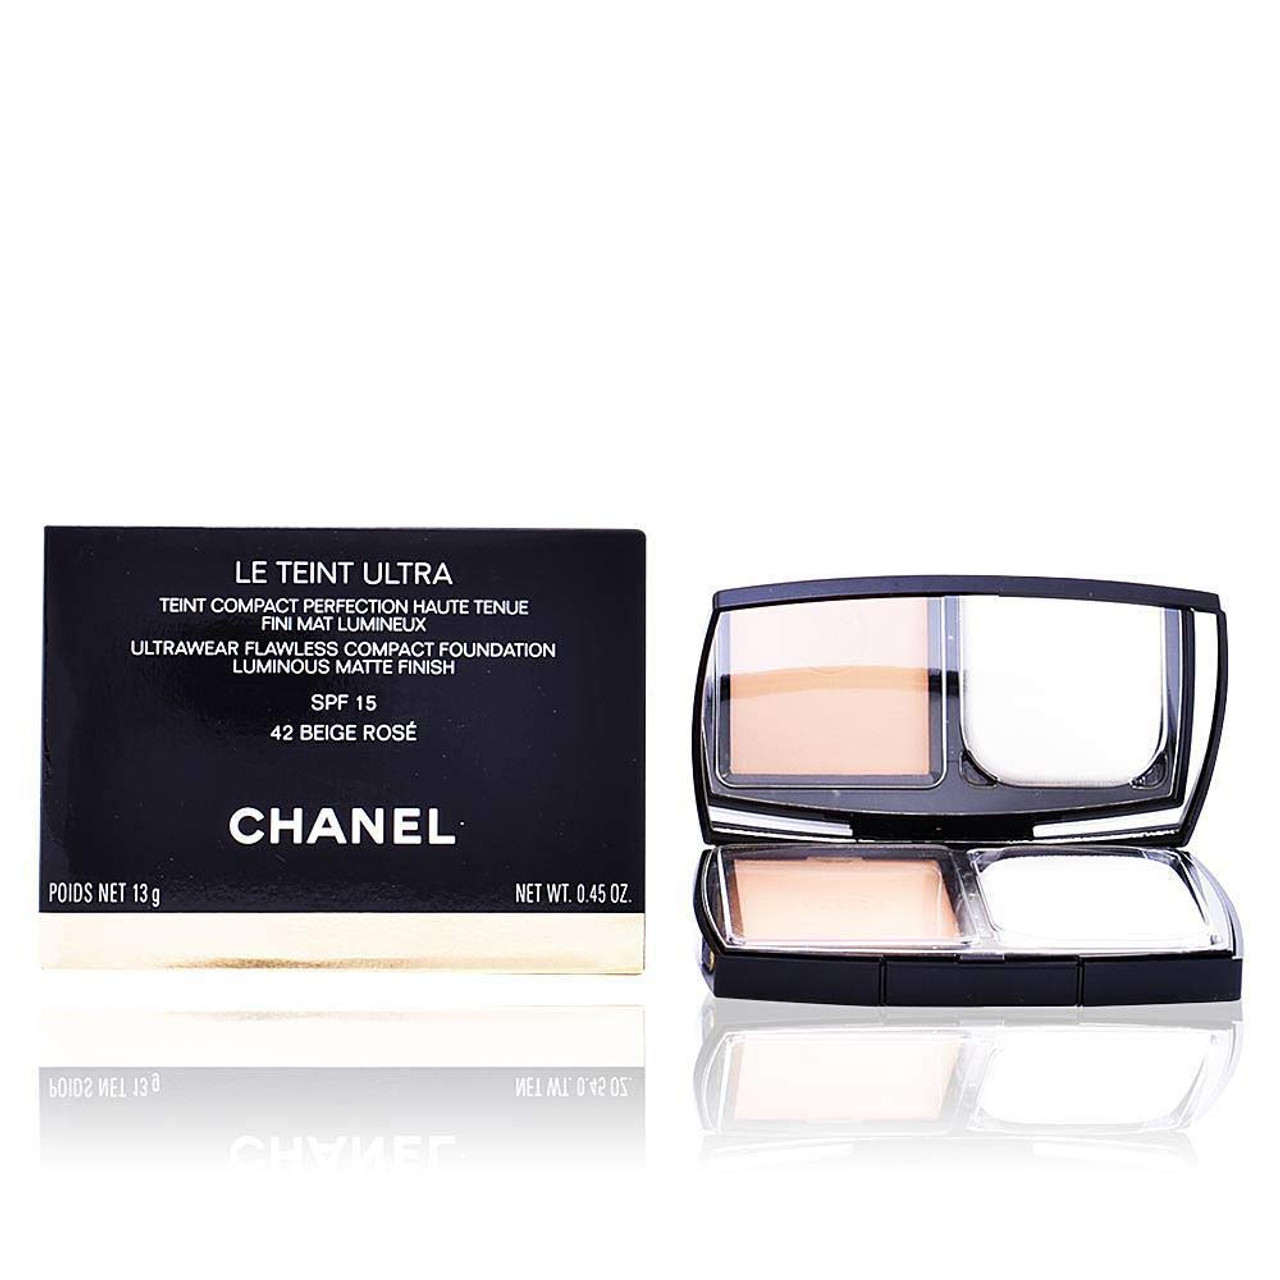 Chanel Le Teint Ultra Compact Foundation Spf15 42 Beige Rose 13g